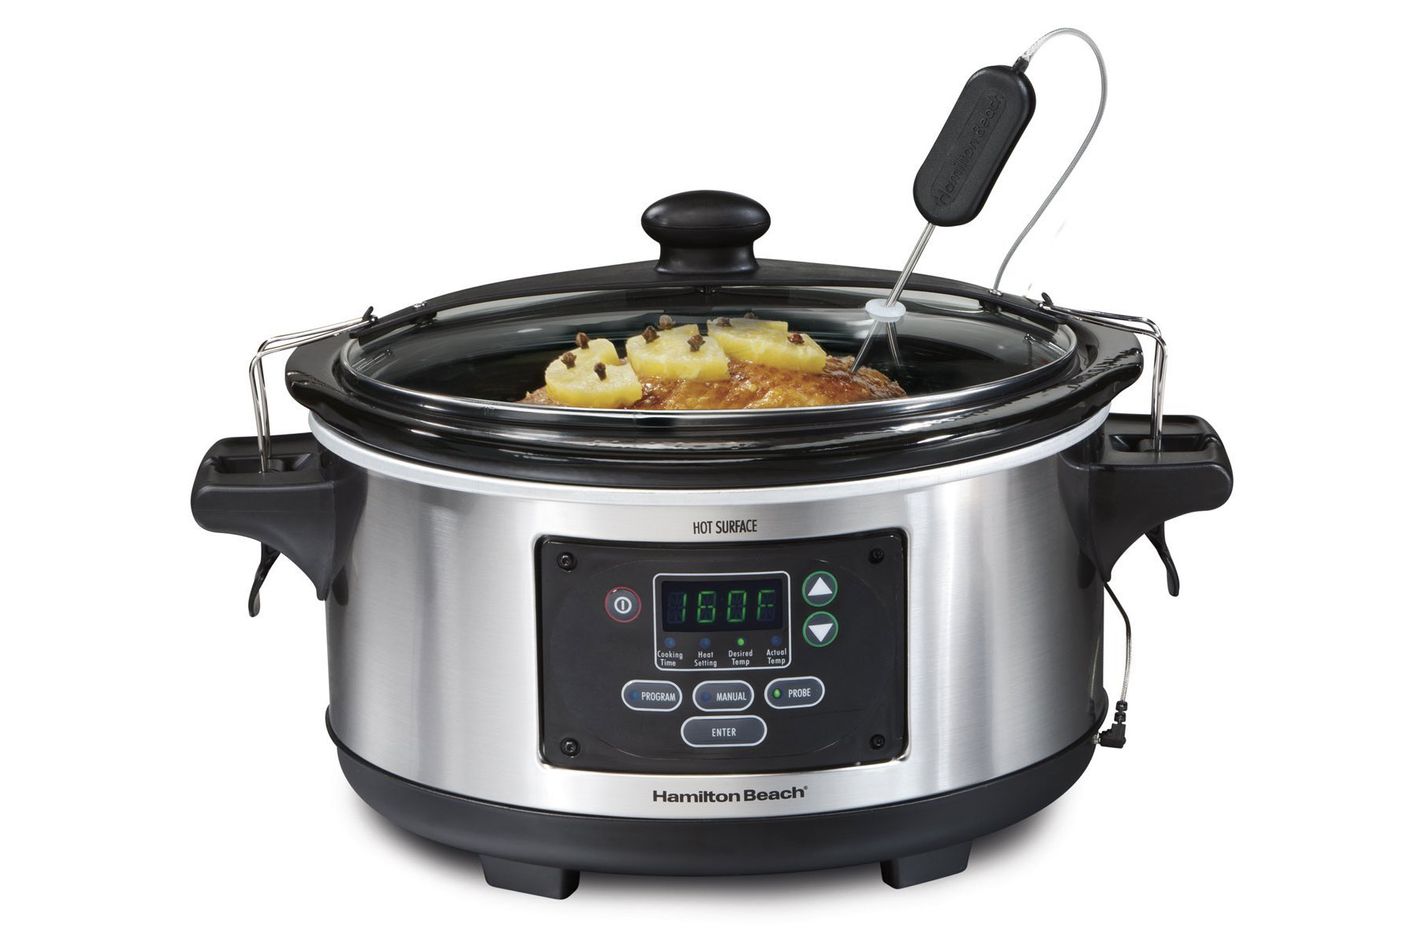 5 best slow cookers, according to experts